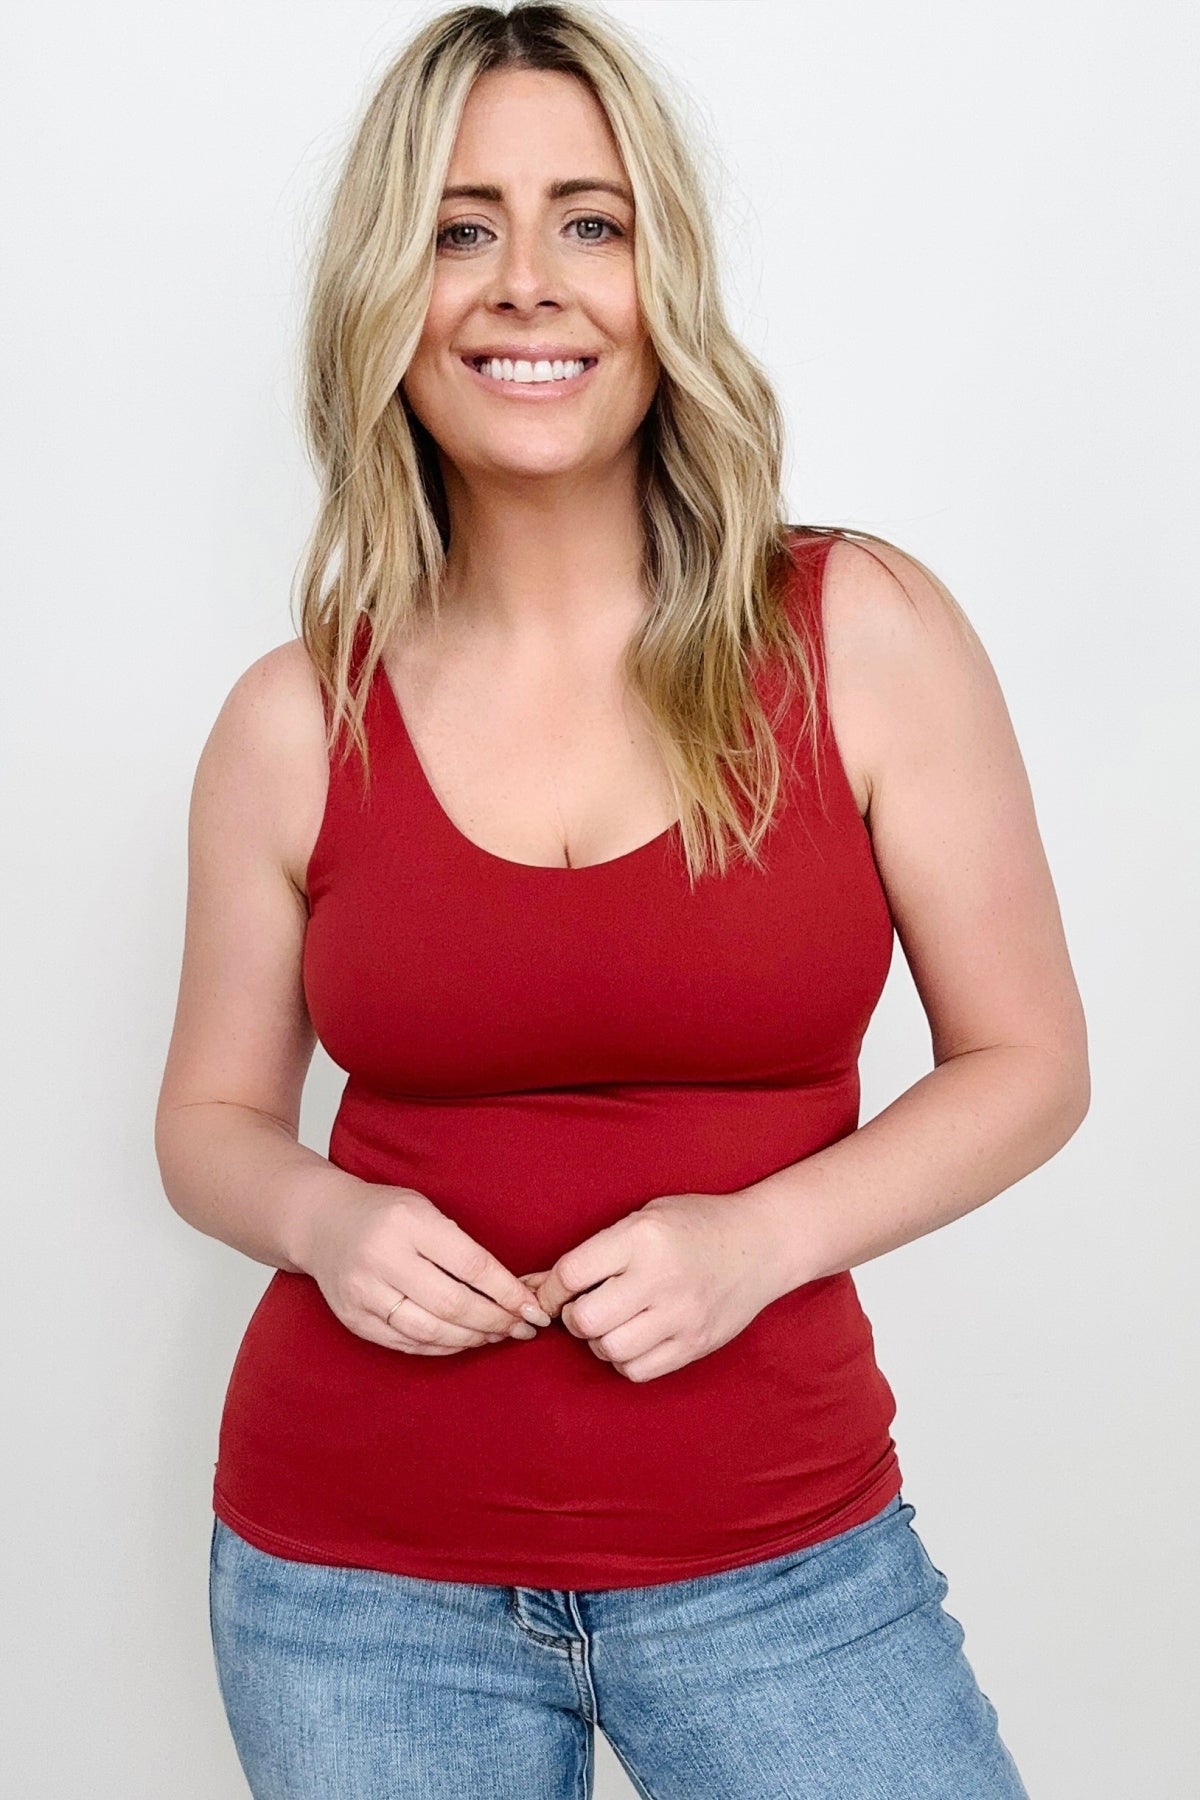 Fawn Fit Medium Length Lift Tank 2.0 with Built In Bra - 11 colors - R –  shopwithkarolyn